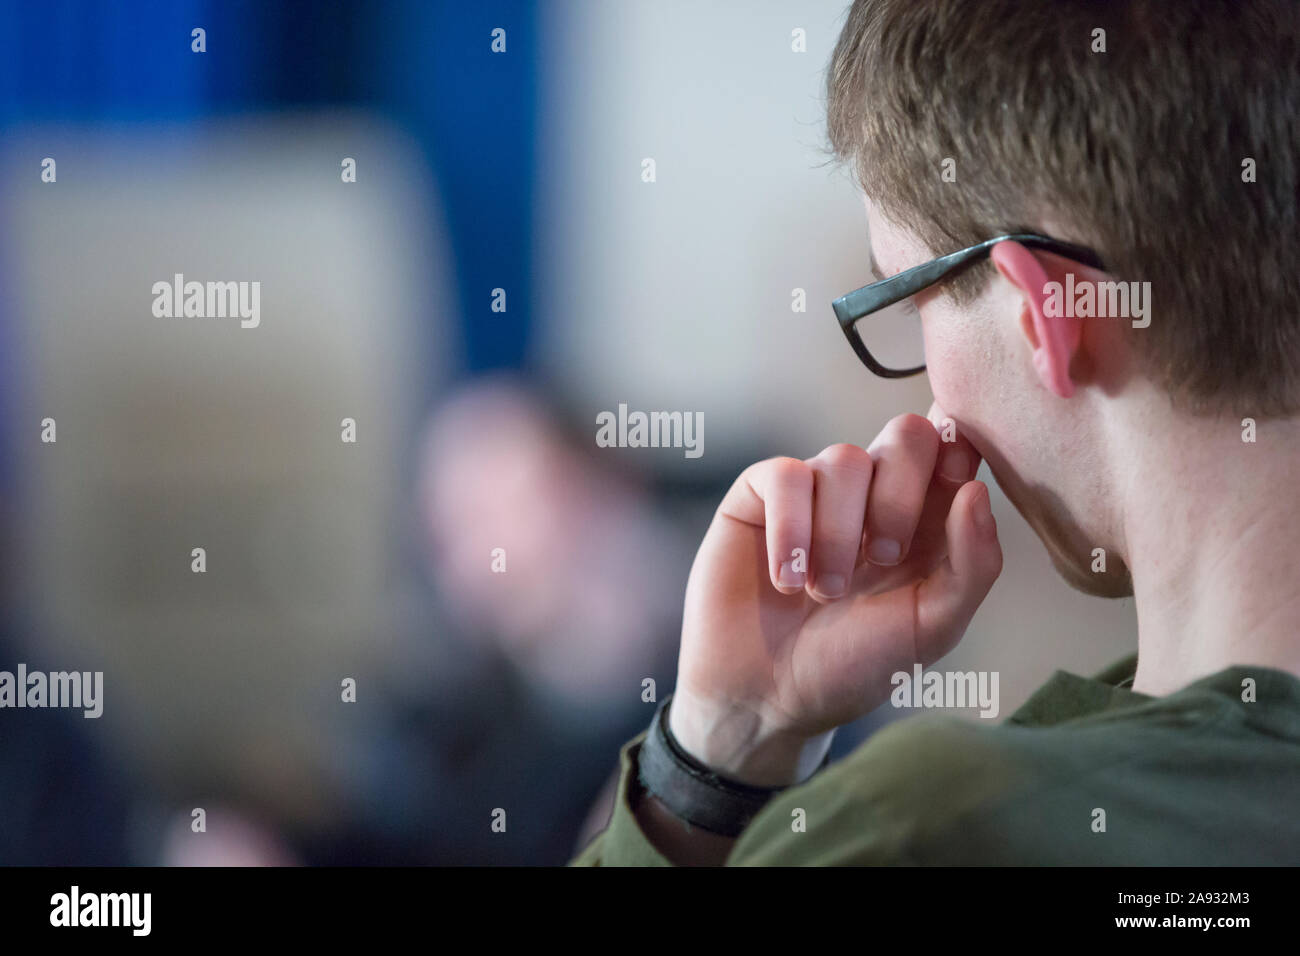 Young man with Cerebral Palsy and Nonverbal learning disorder in a meeting Stock Photo